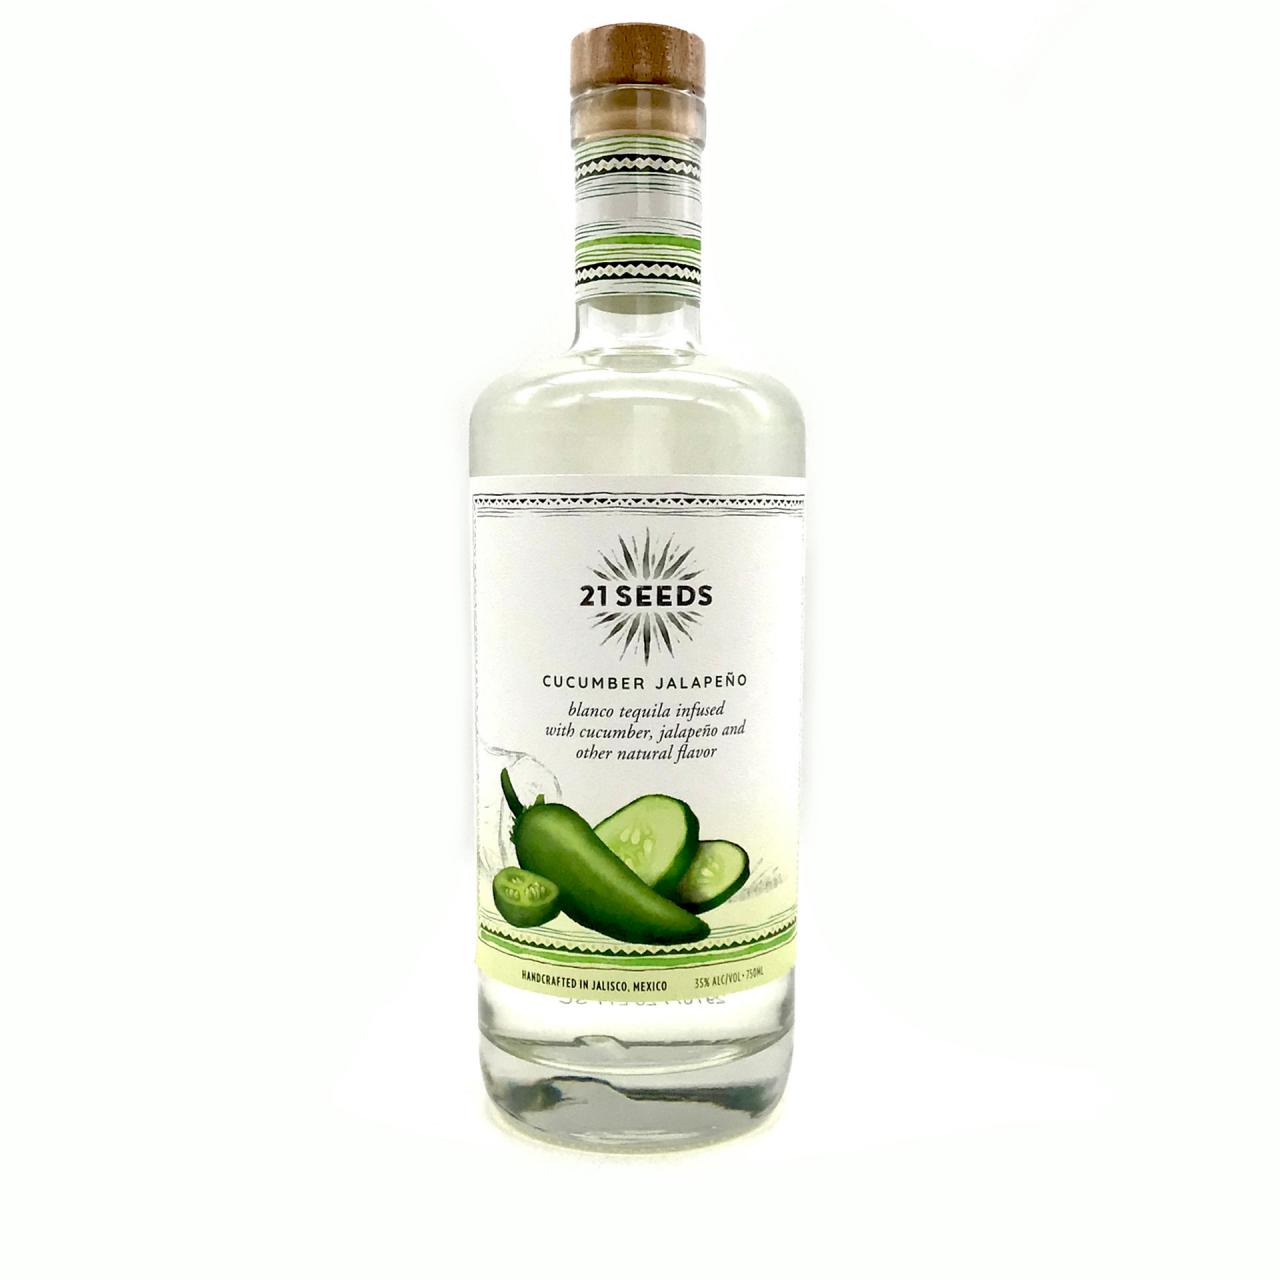 Cucumber tequila seeds infused 750ml jalapeno jalapeño release